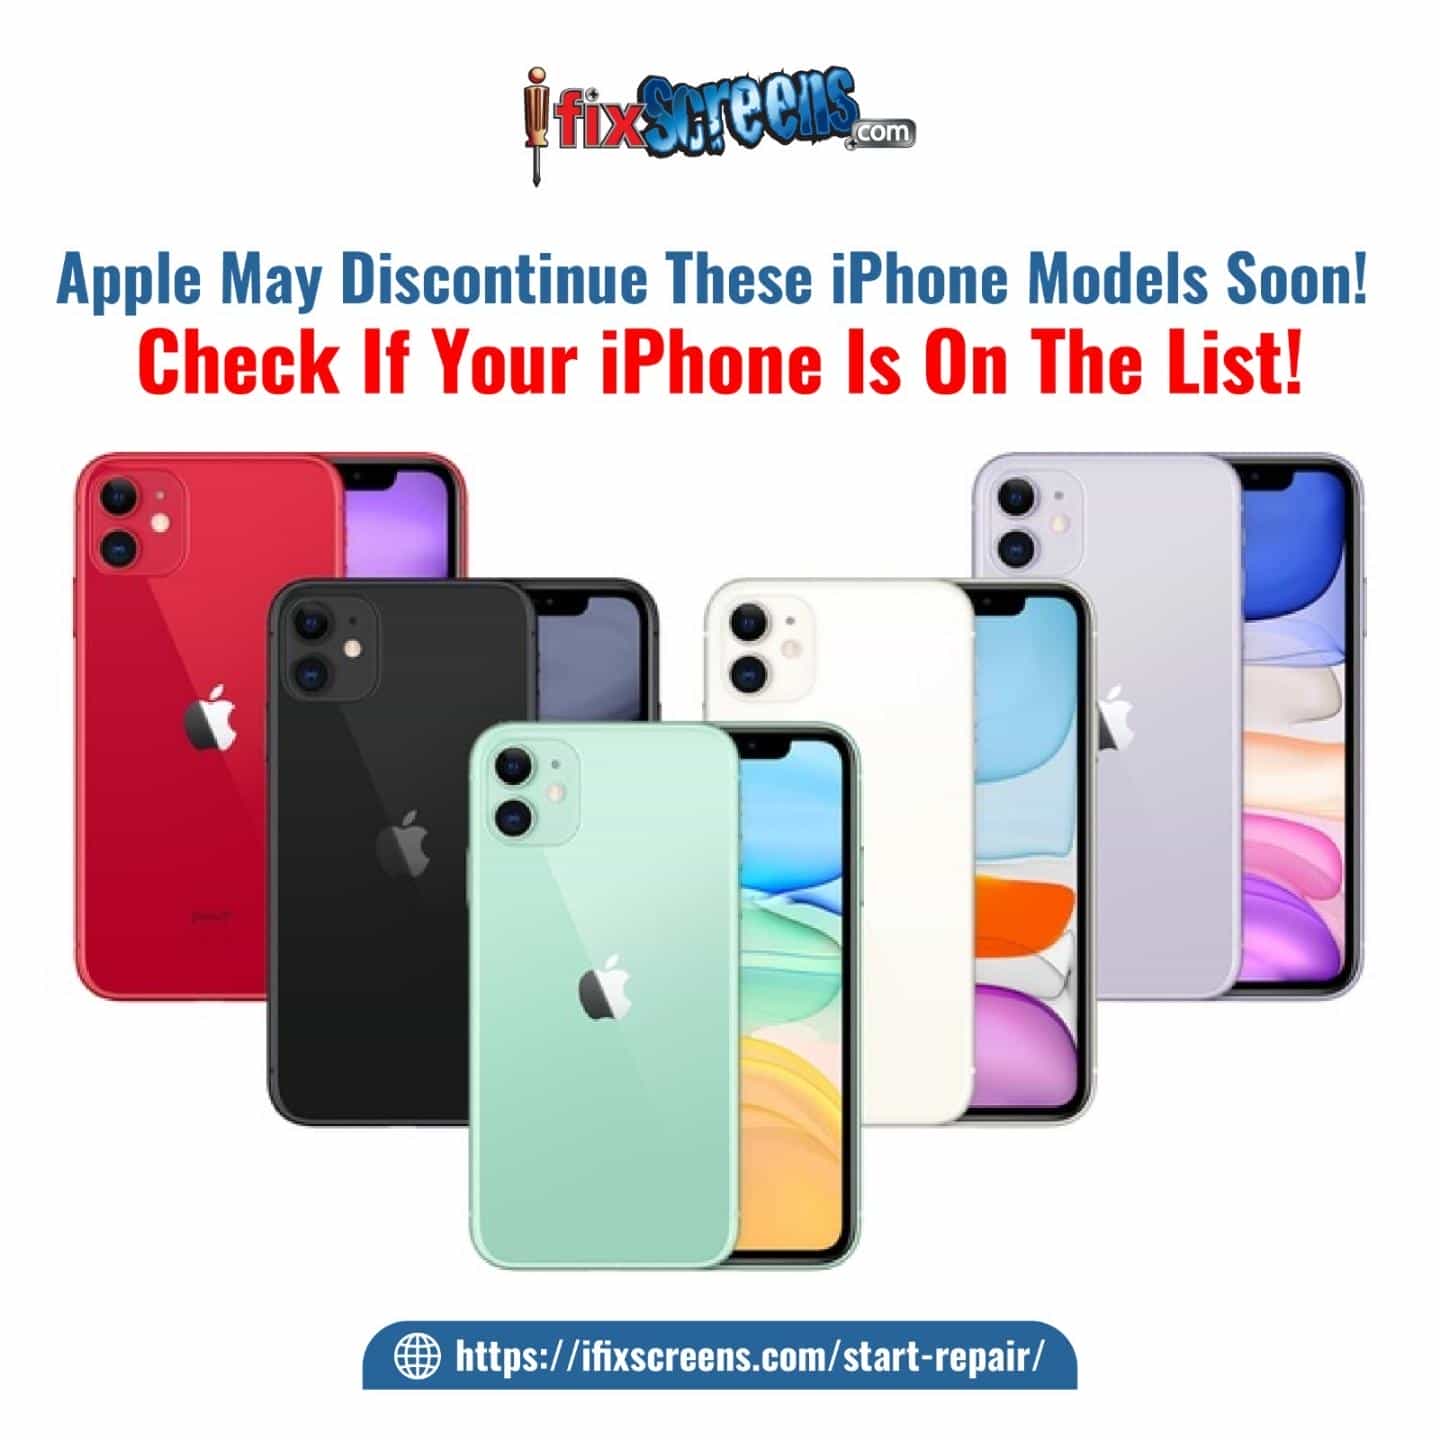 Apple May Discontinue Some Iphone Models Soon!